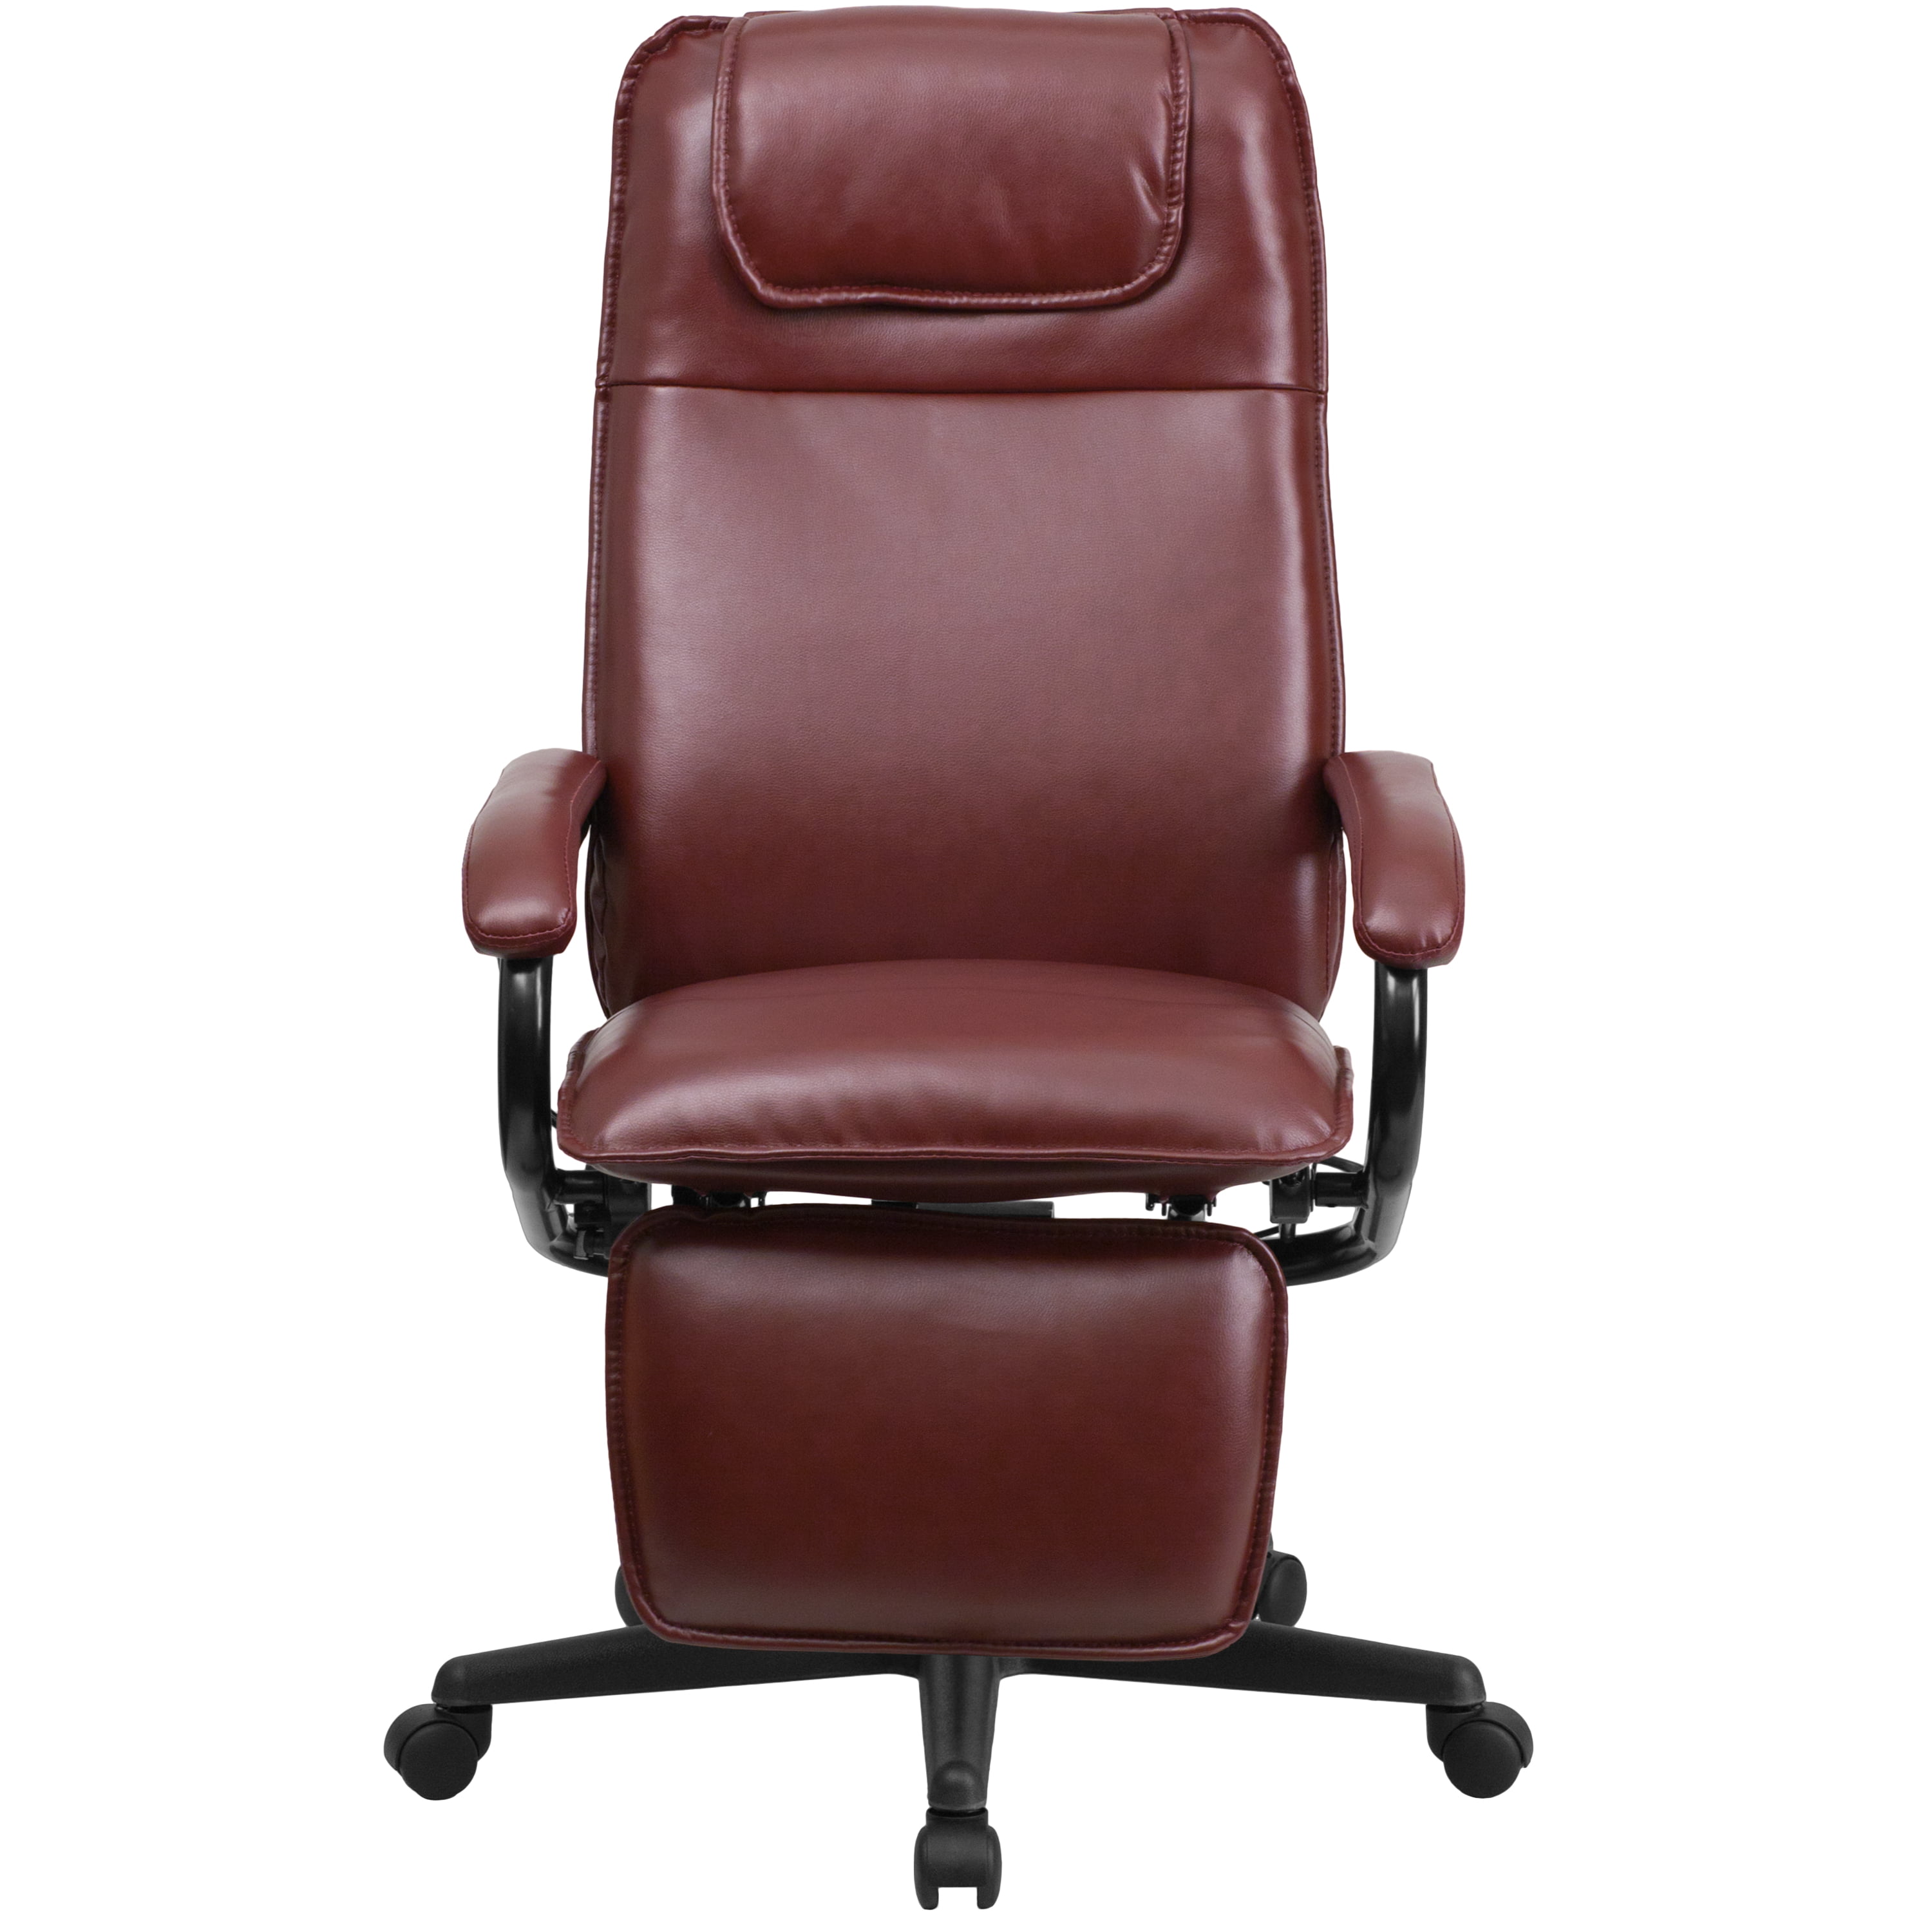 NEW HIGH BACK BURGUNDY LEATHER EXECUTIVE RECLINING OFFICE CHAIR 